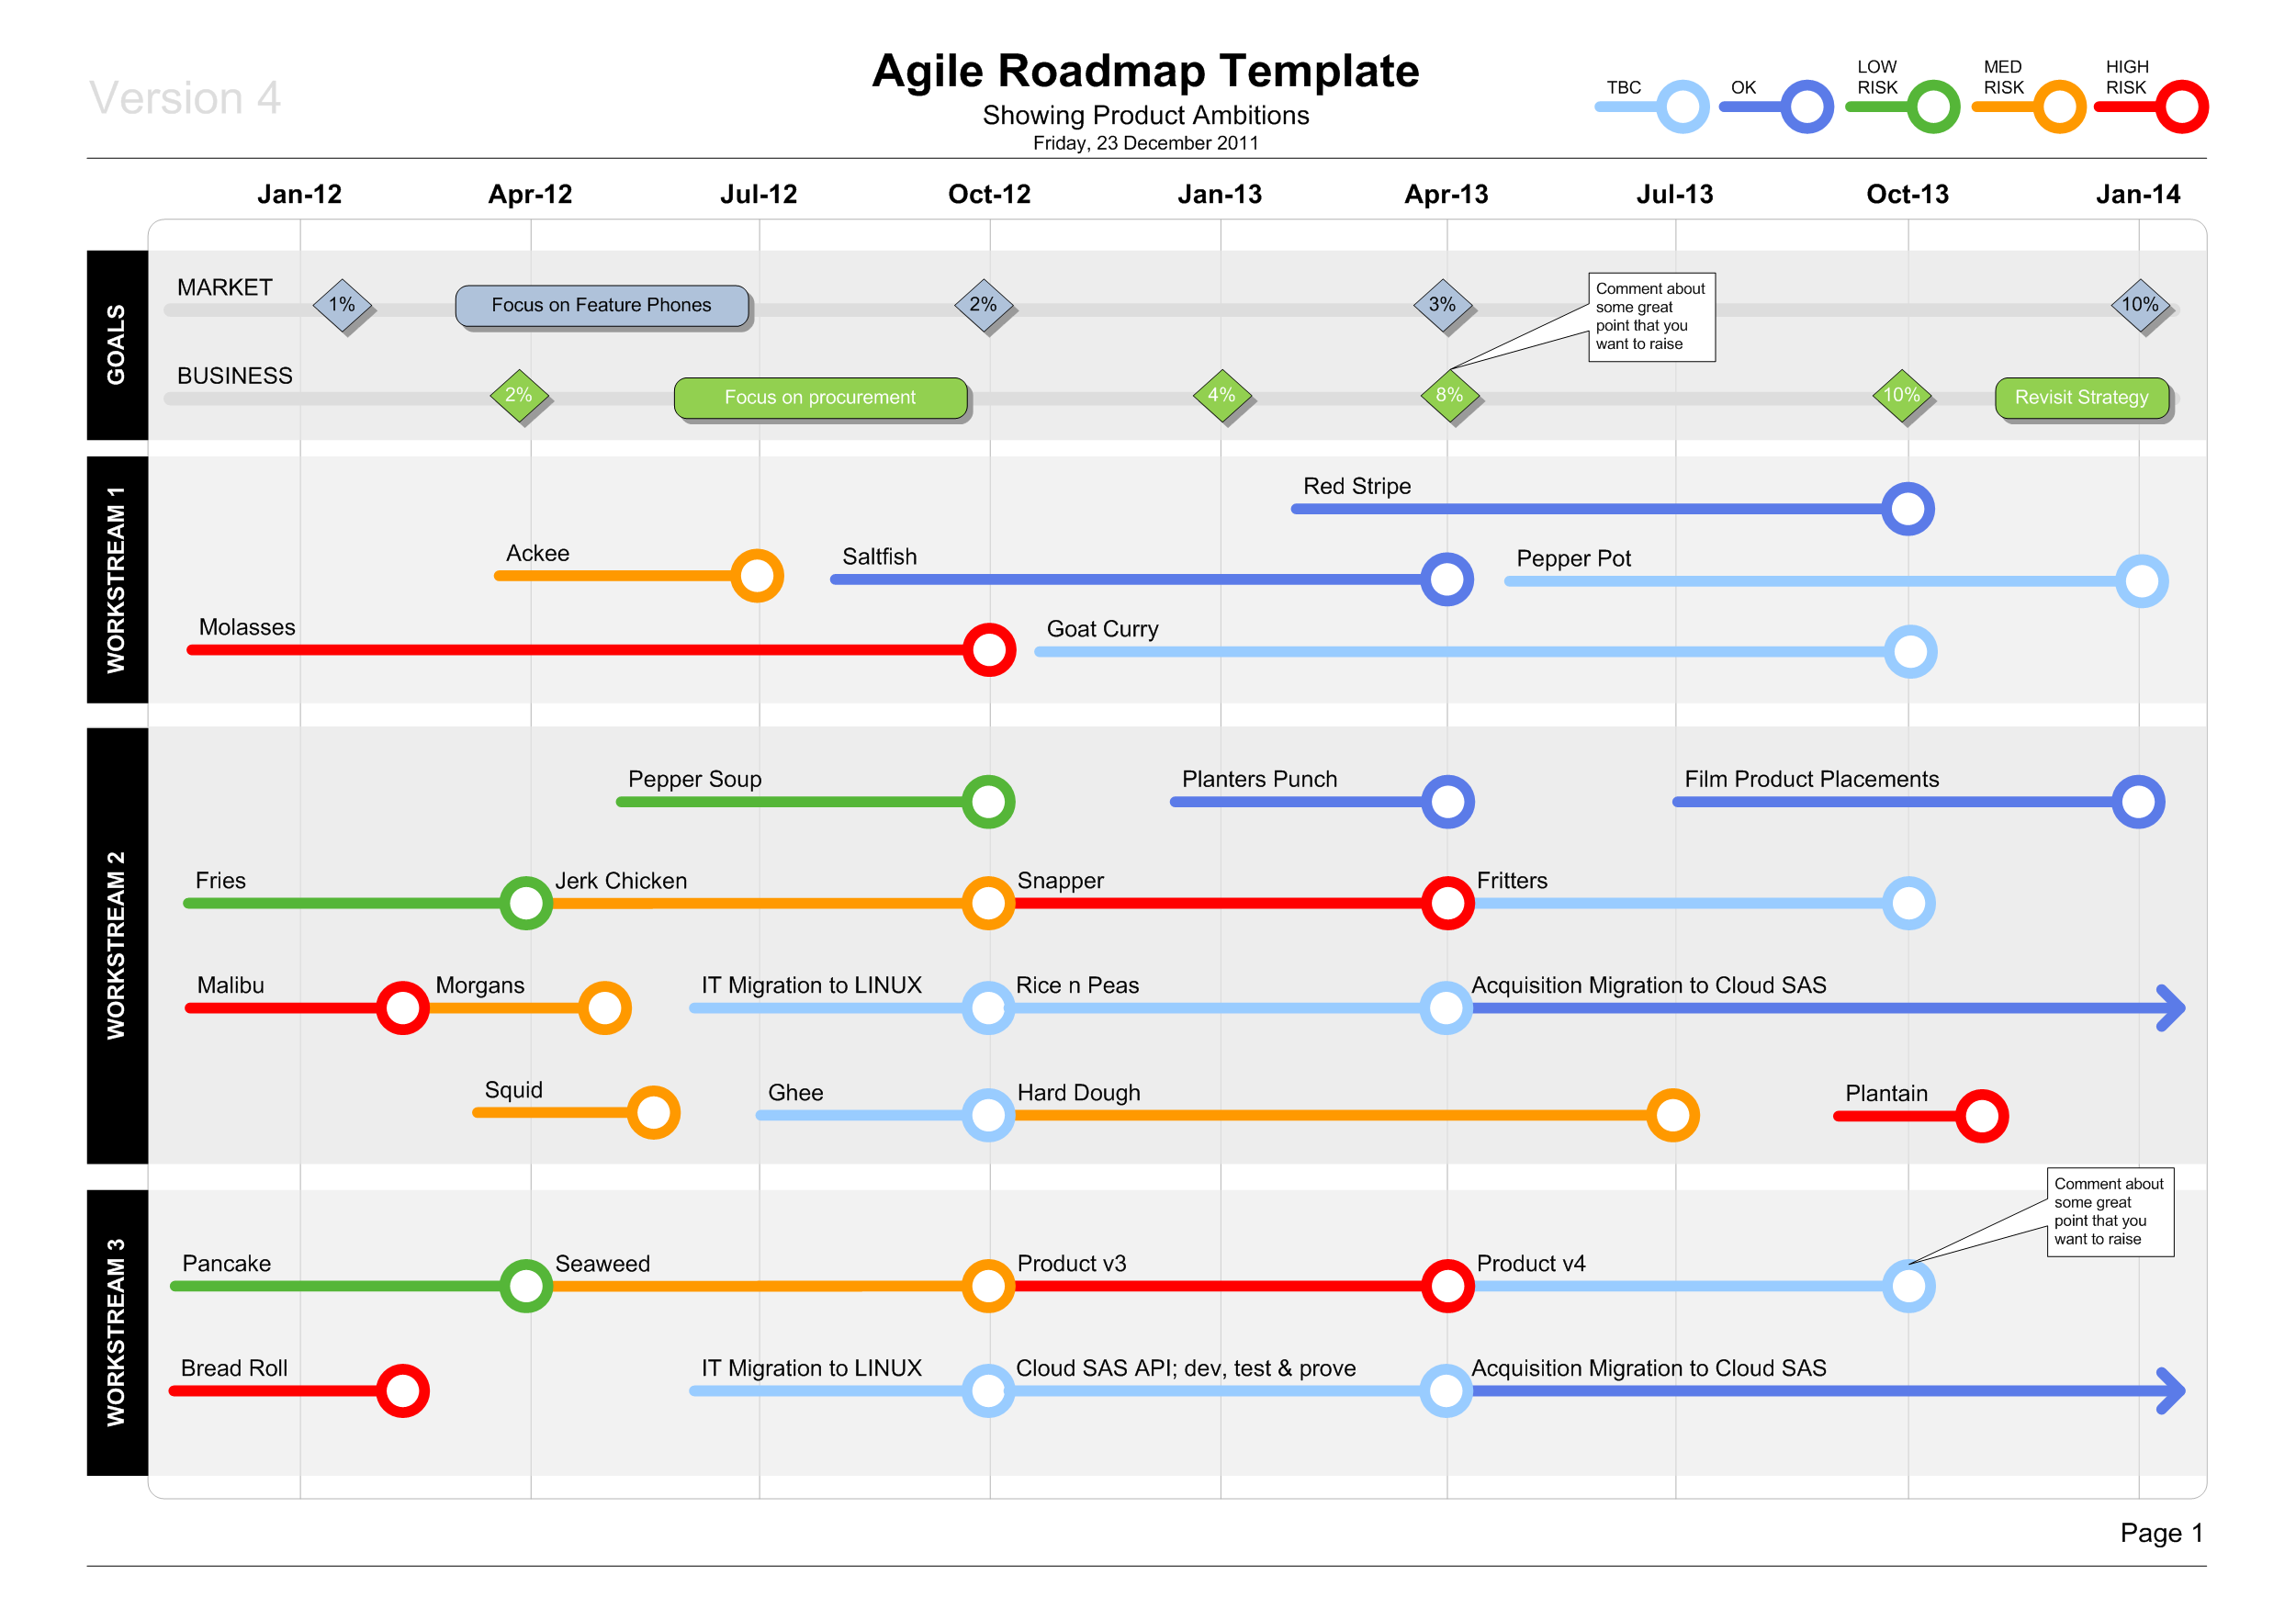 Visio Agile Roadmap Template Download & Use it Now!